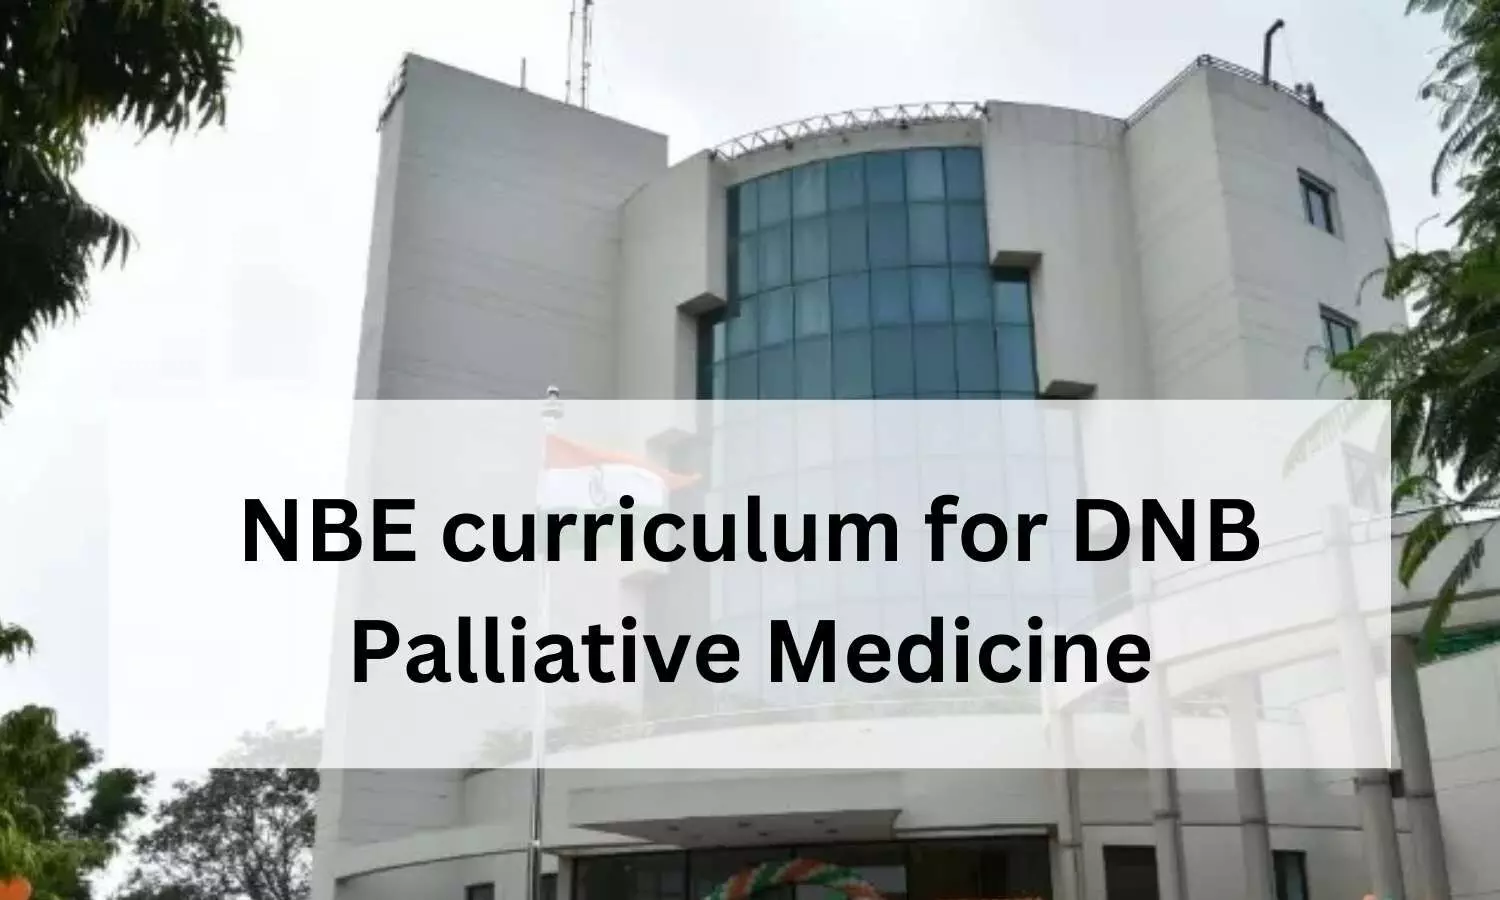 DNB Palliative Medicine in India: Check out NBE released curriculum